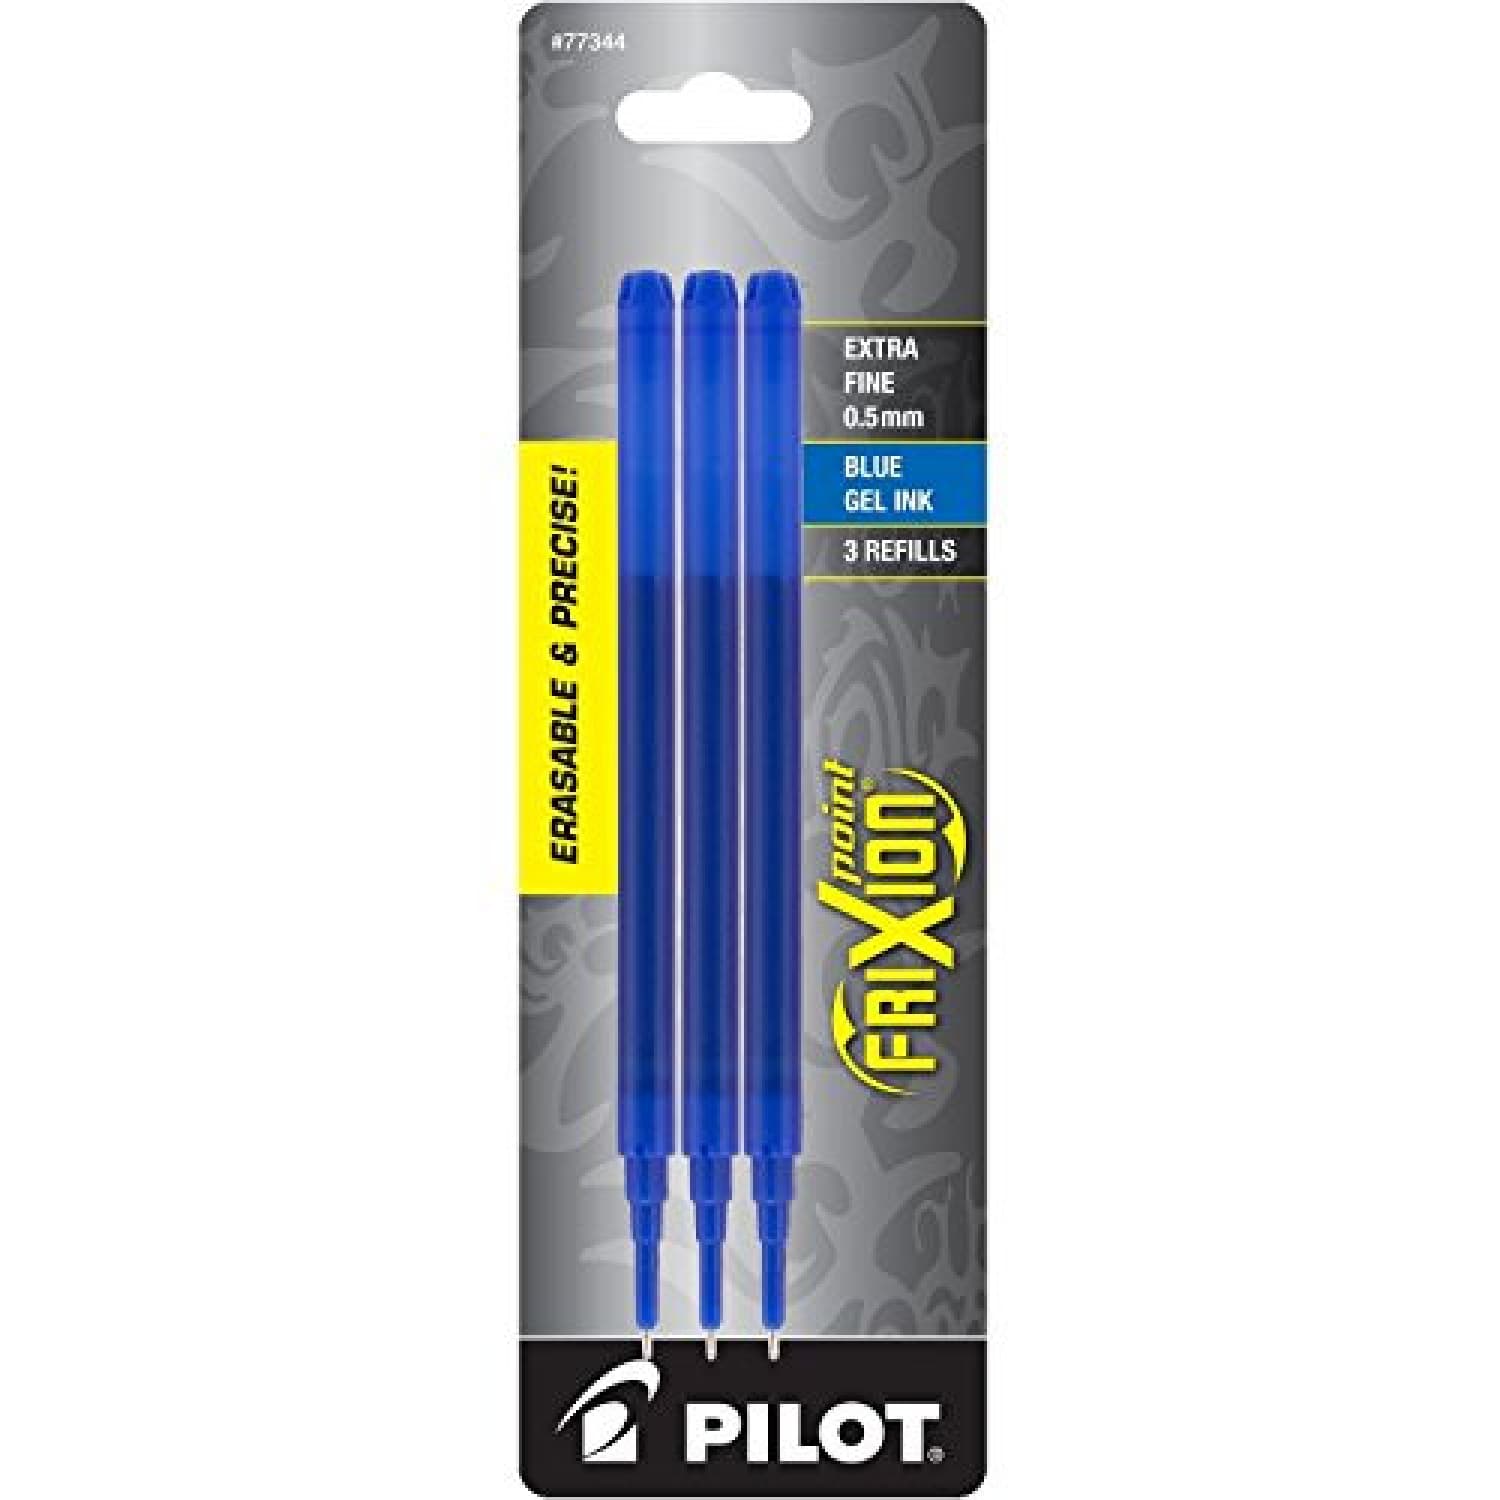 Pilot, FriXion Point Erasable & Refillable Gel Ink Pens, Extra Fine Point 0.5 mm, Pack of 6, Assorted Colors